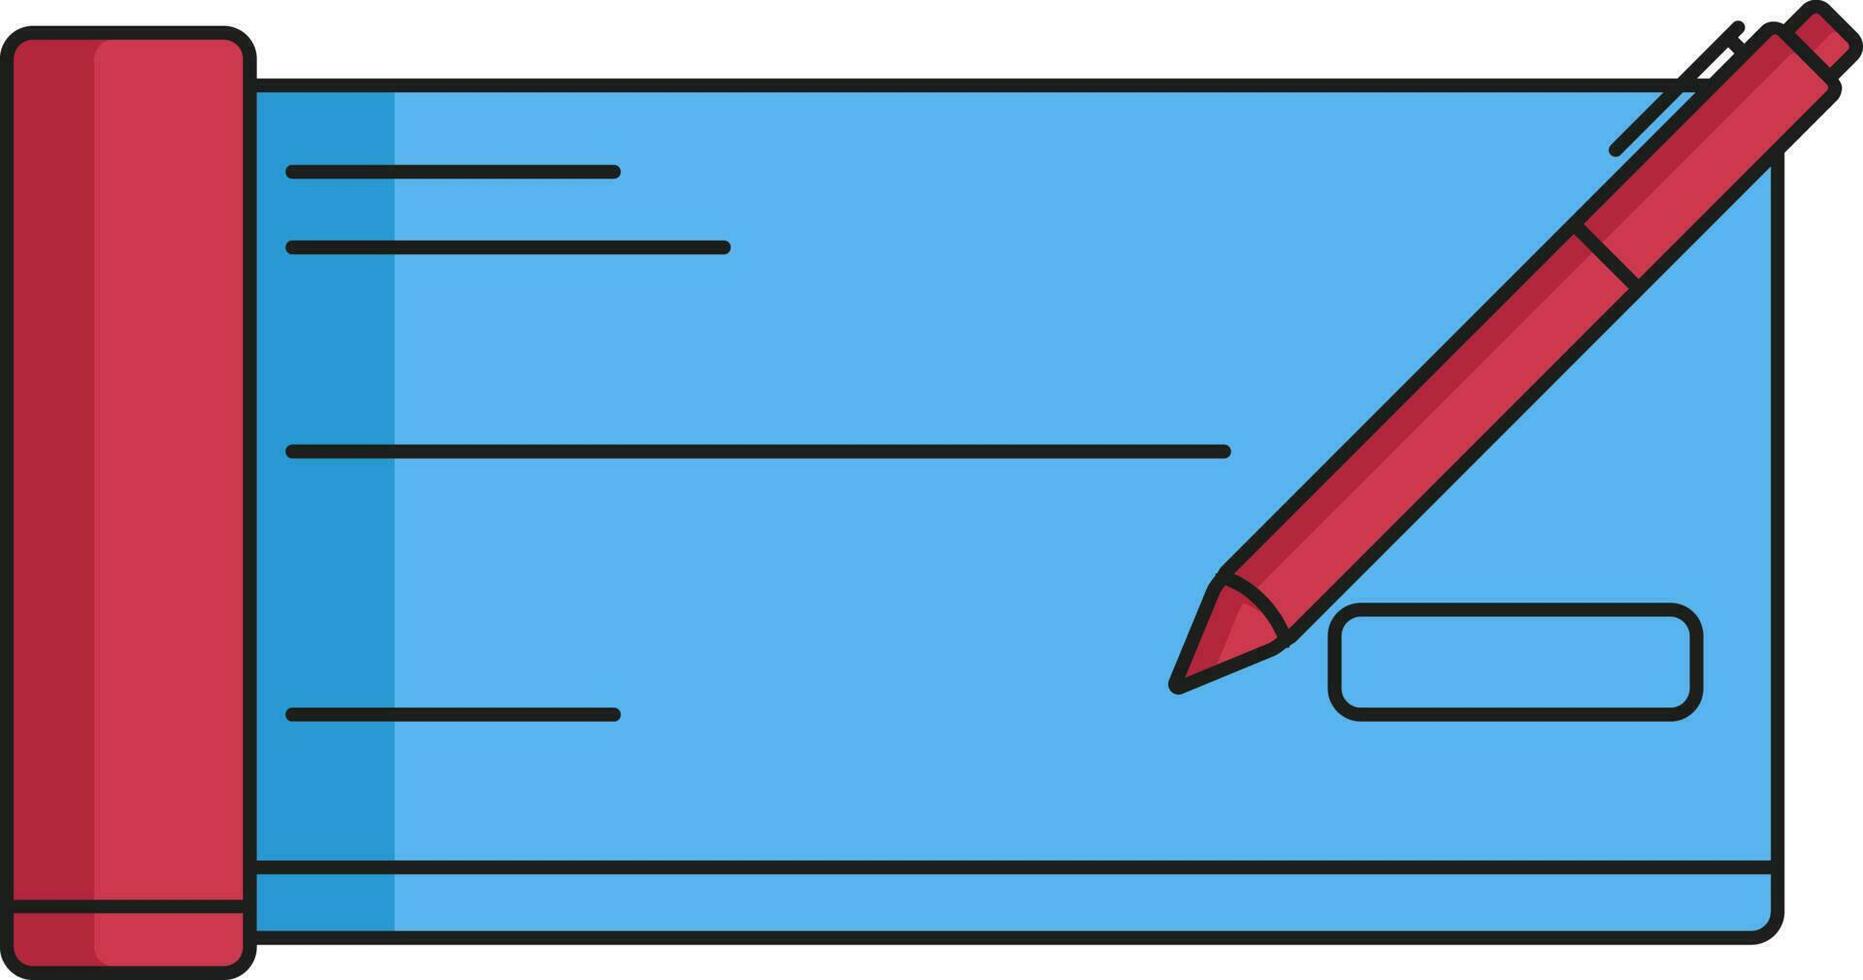 Checkbook With Pen Icon In Red And Blue Color. vector